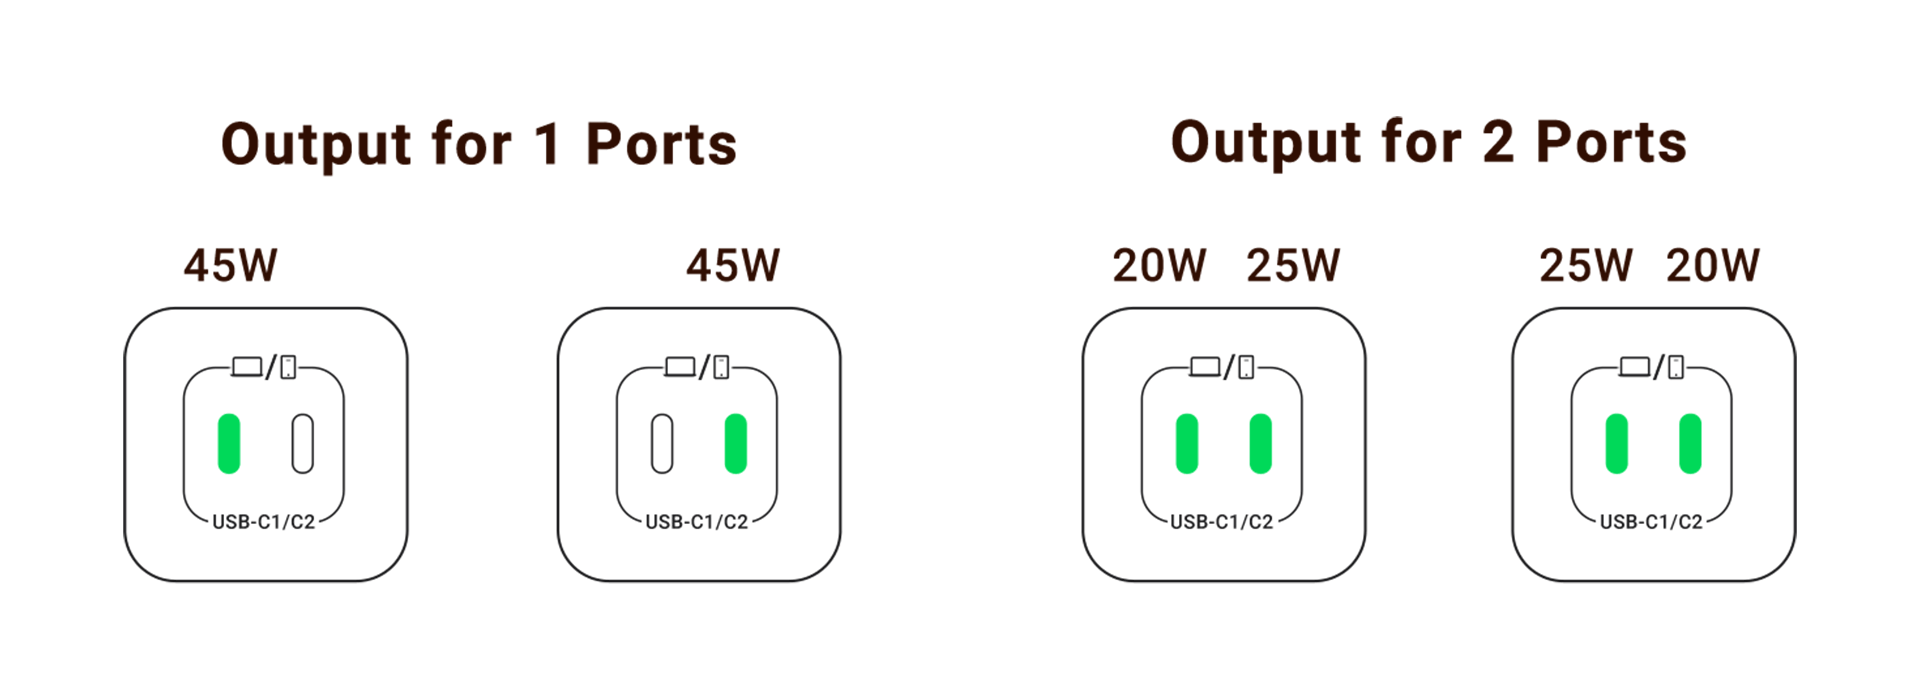 output for 2 ports